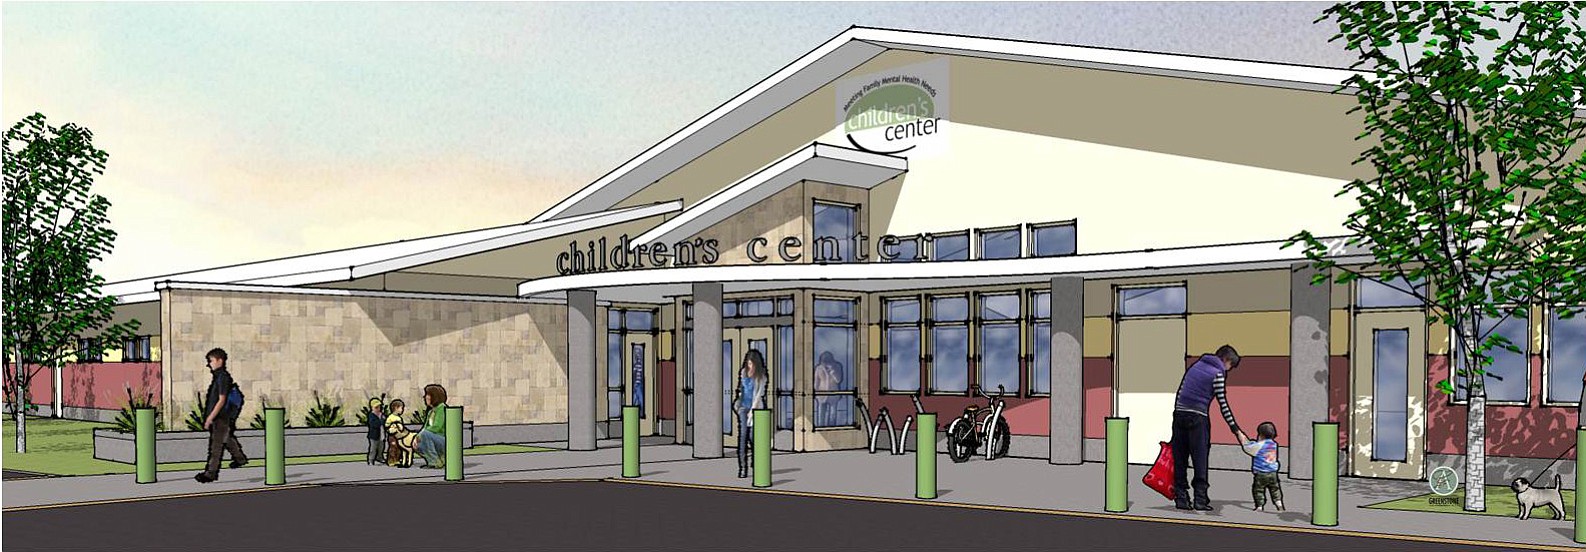 An artist's rendering of the Children's Center building that broke ground in east Vancouver on Wednesday.